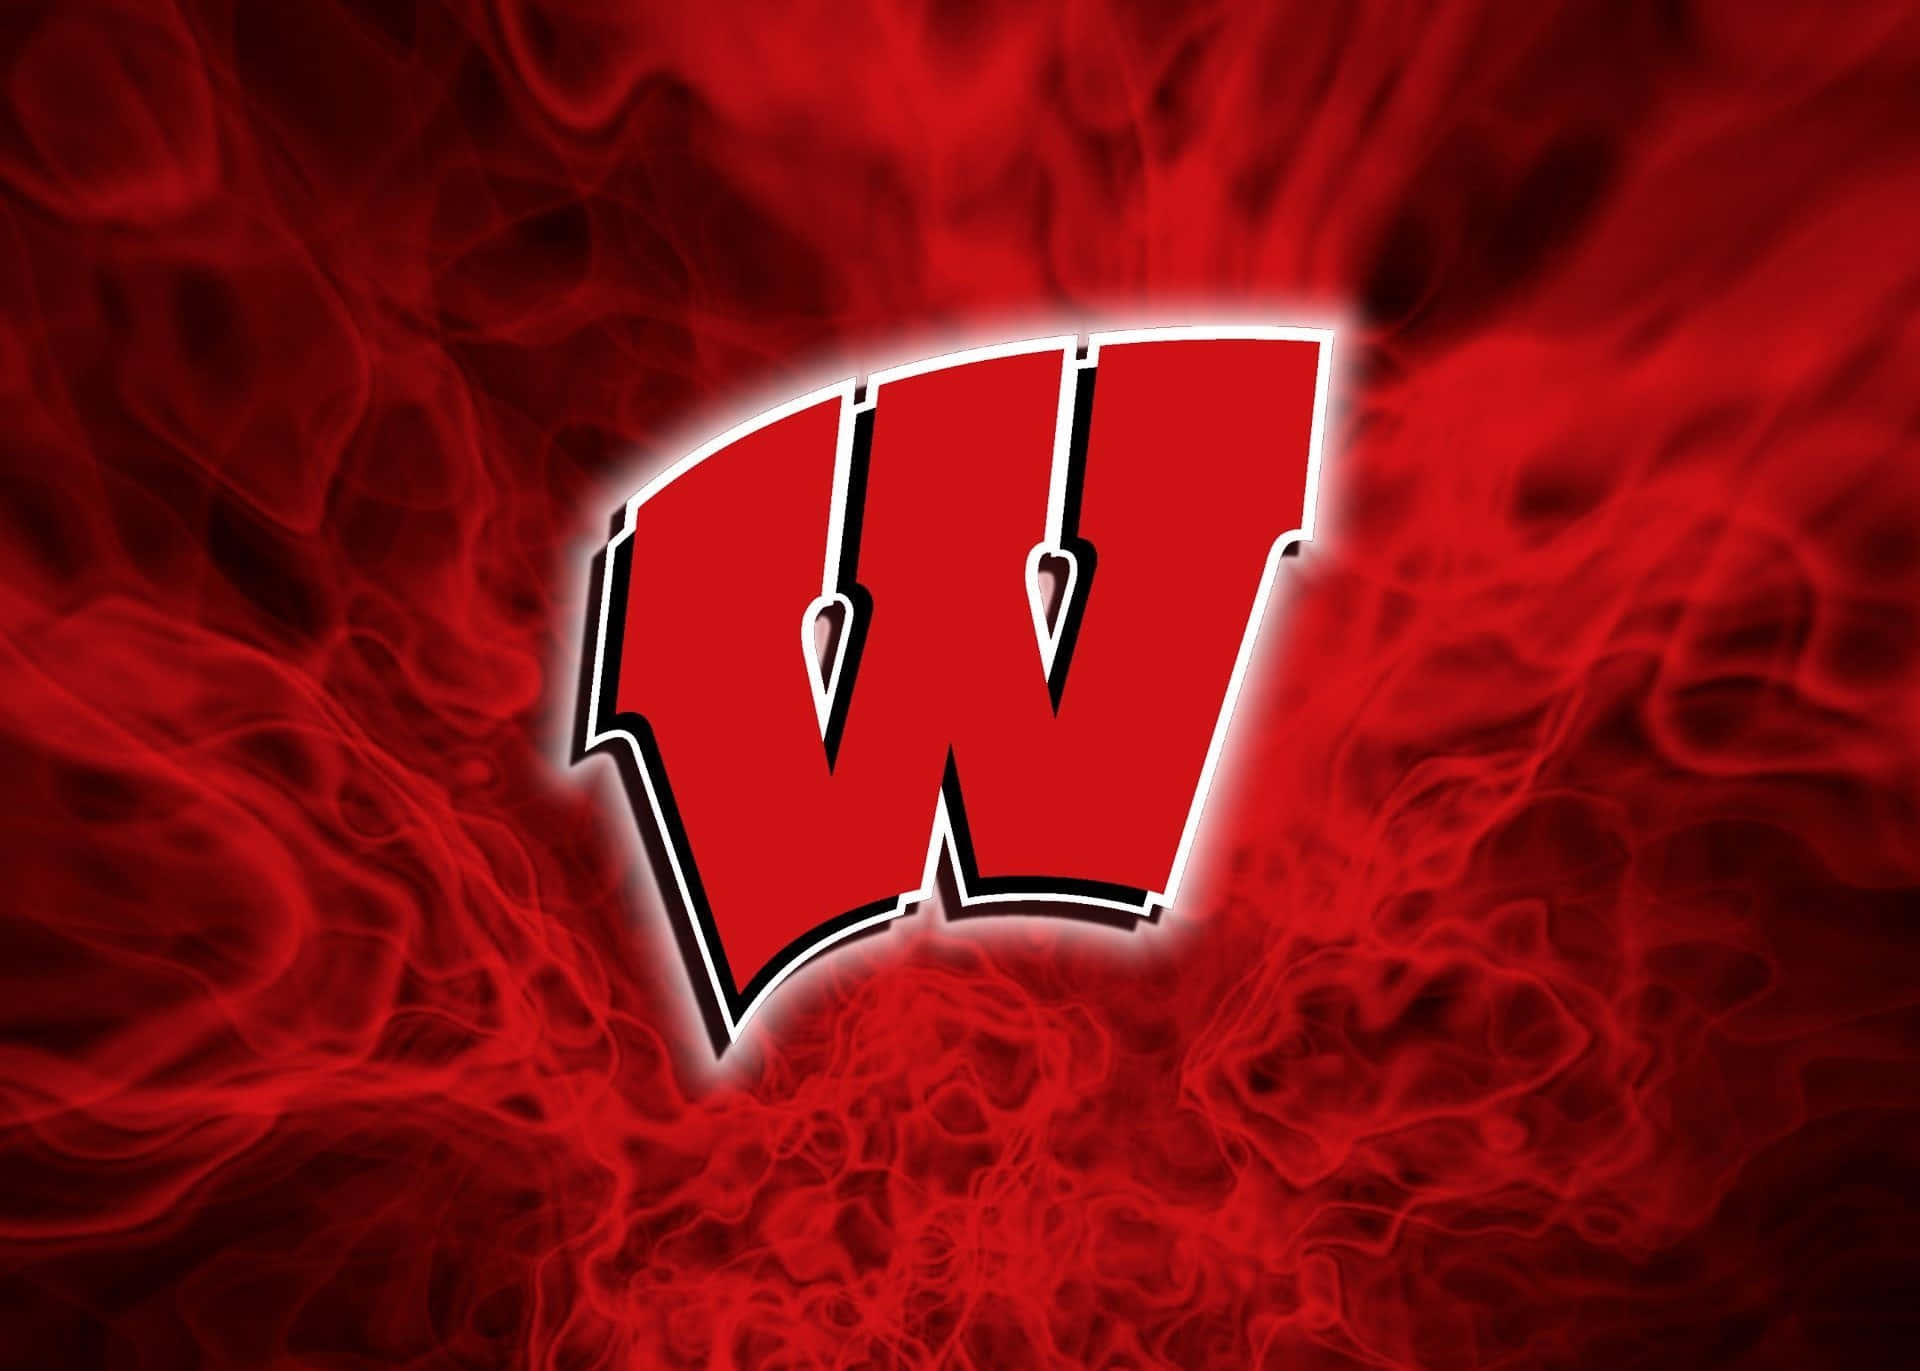 "a Moment Of Triumph - Wisconsin Badgers Football Team In Action" Wallpaper